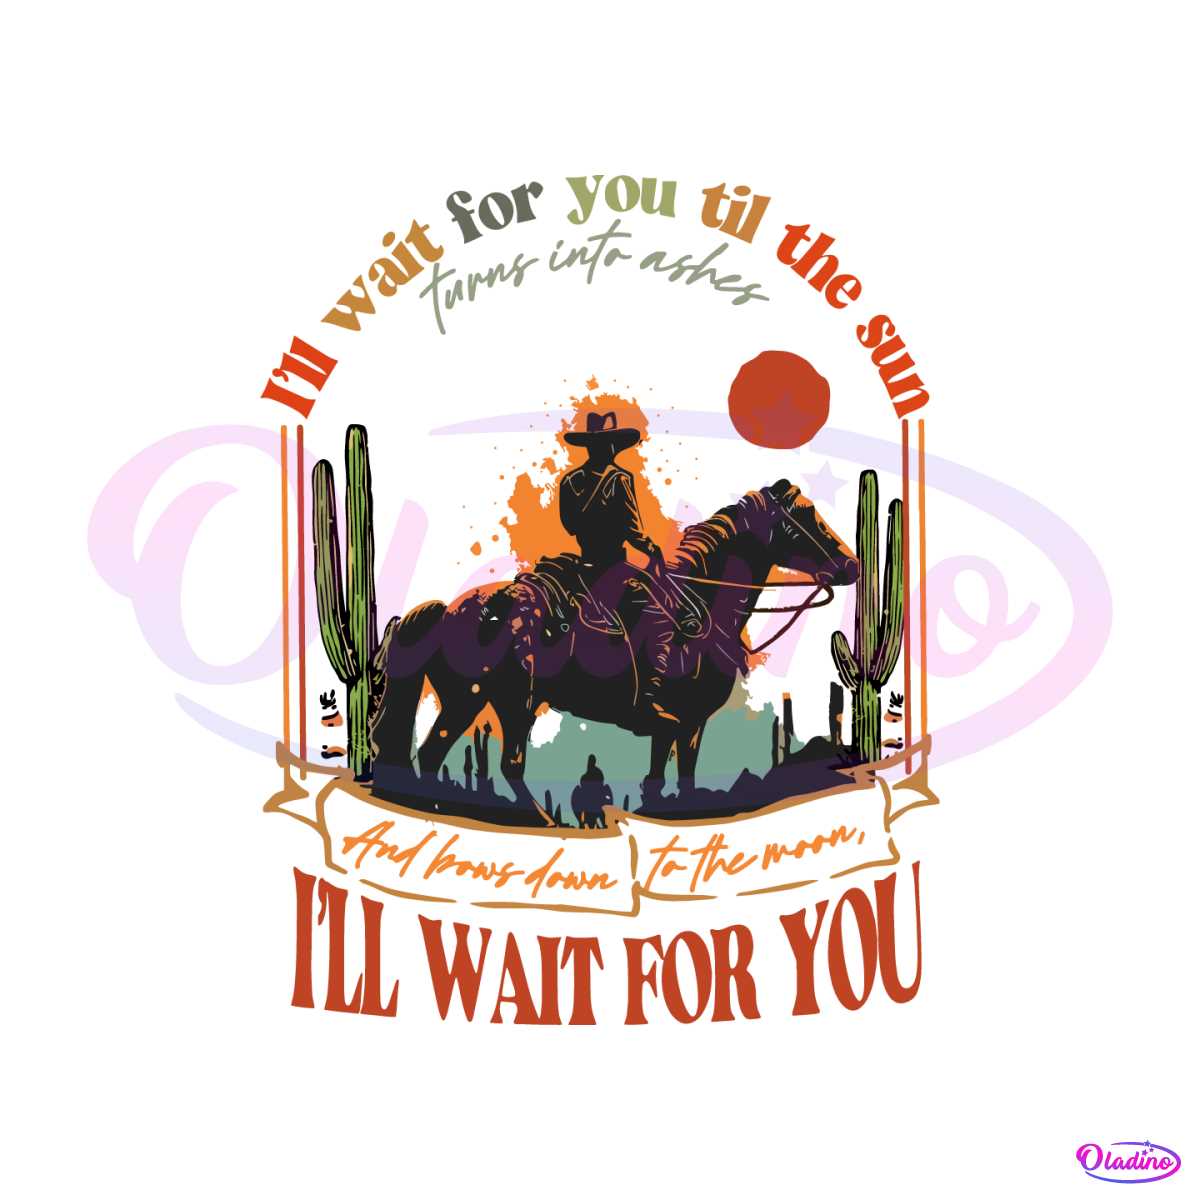 i-will-wait-for-you-svg-tyler-childers-in-your-love-lyrics-svg